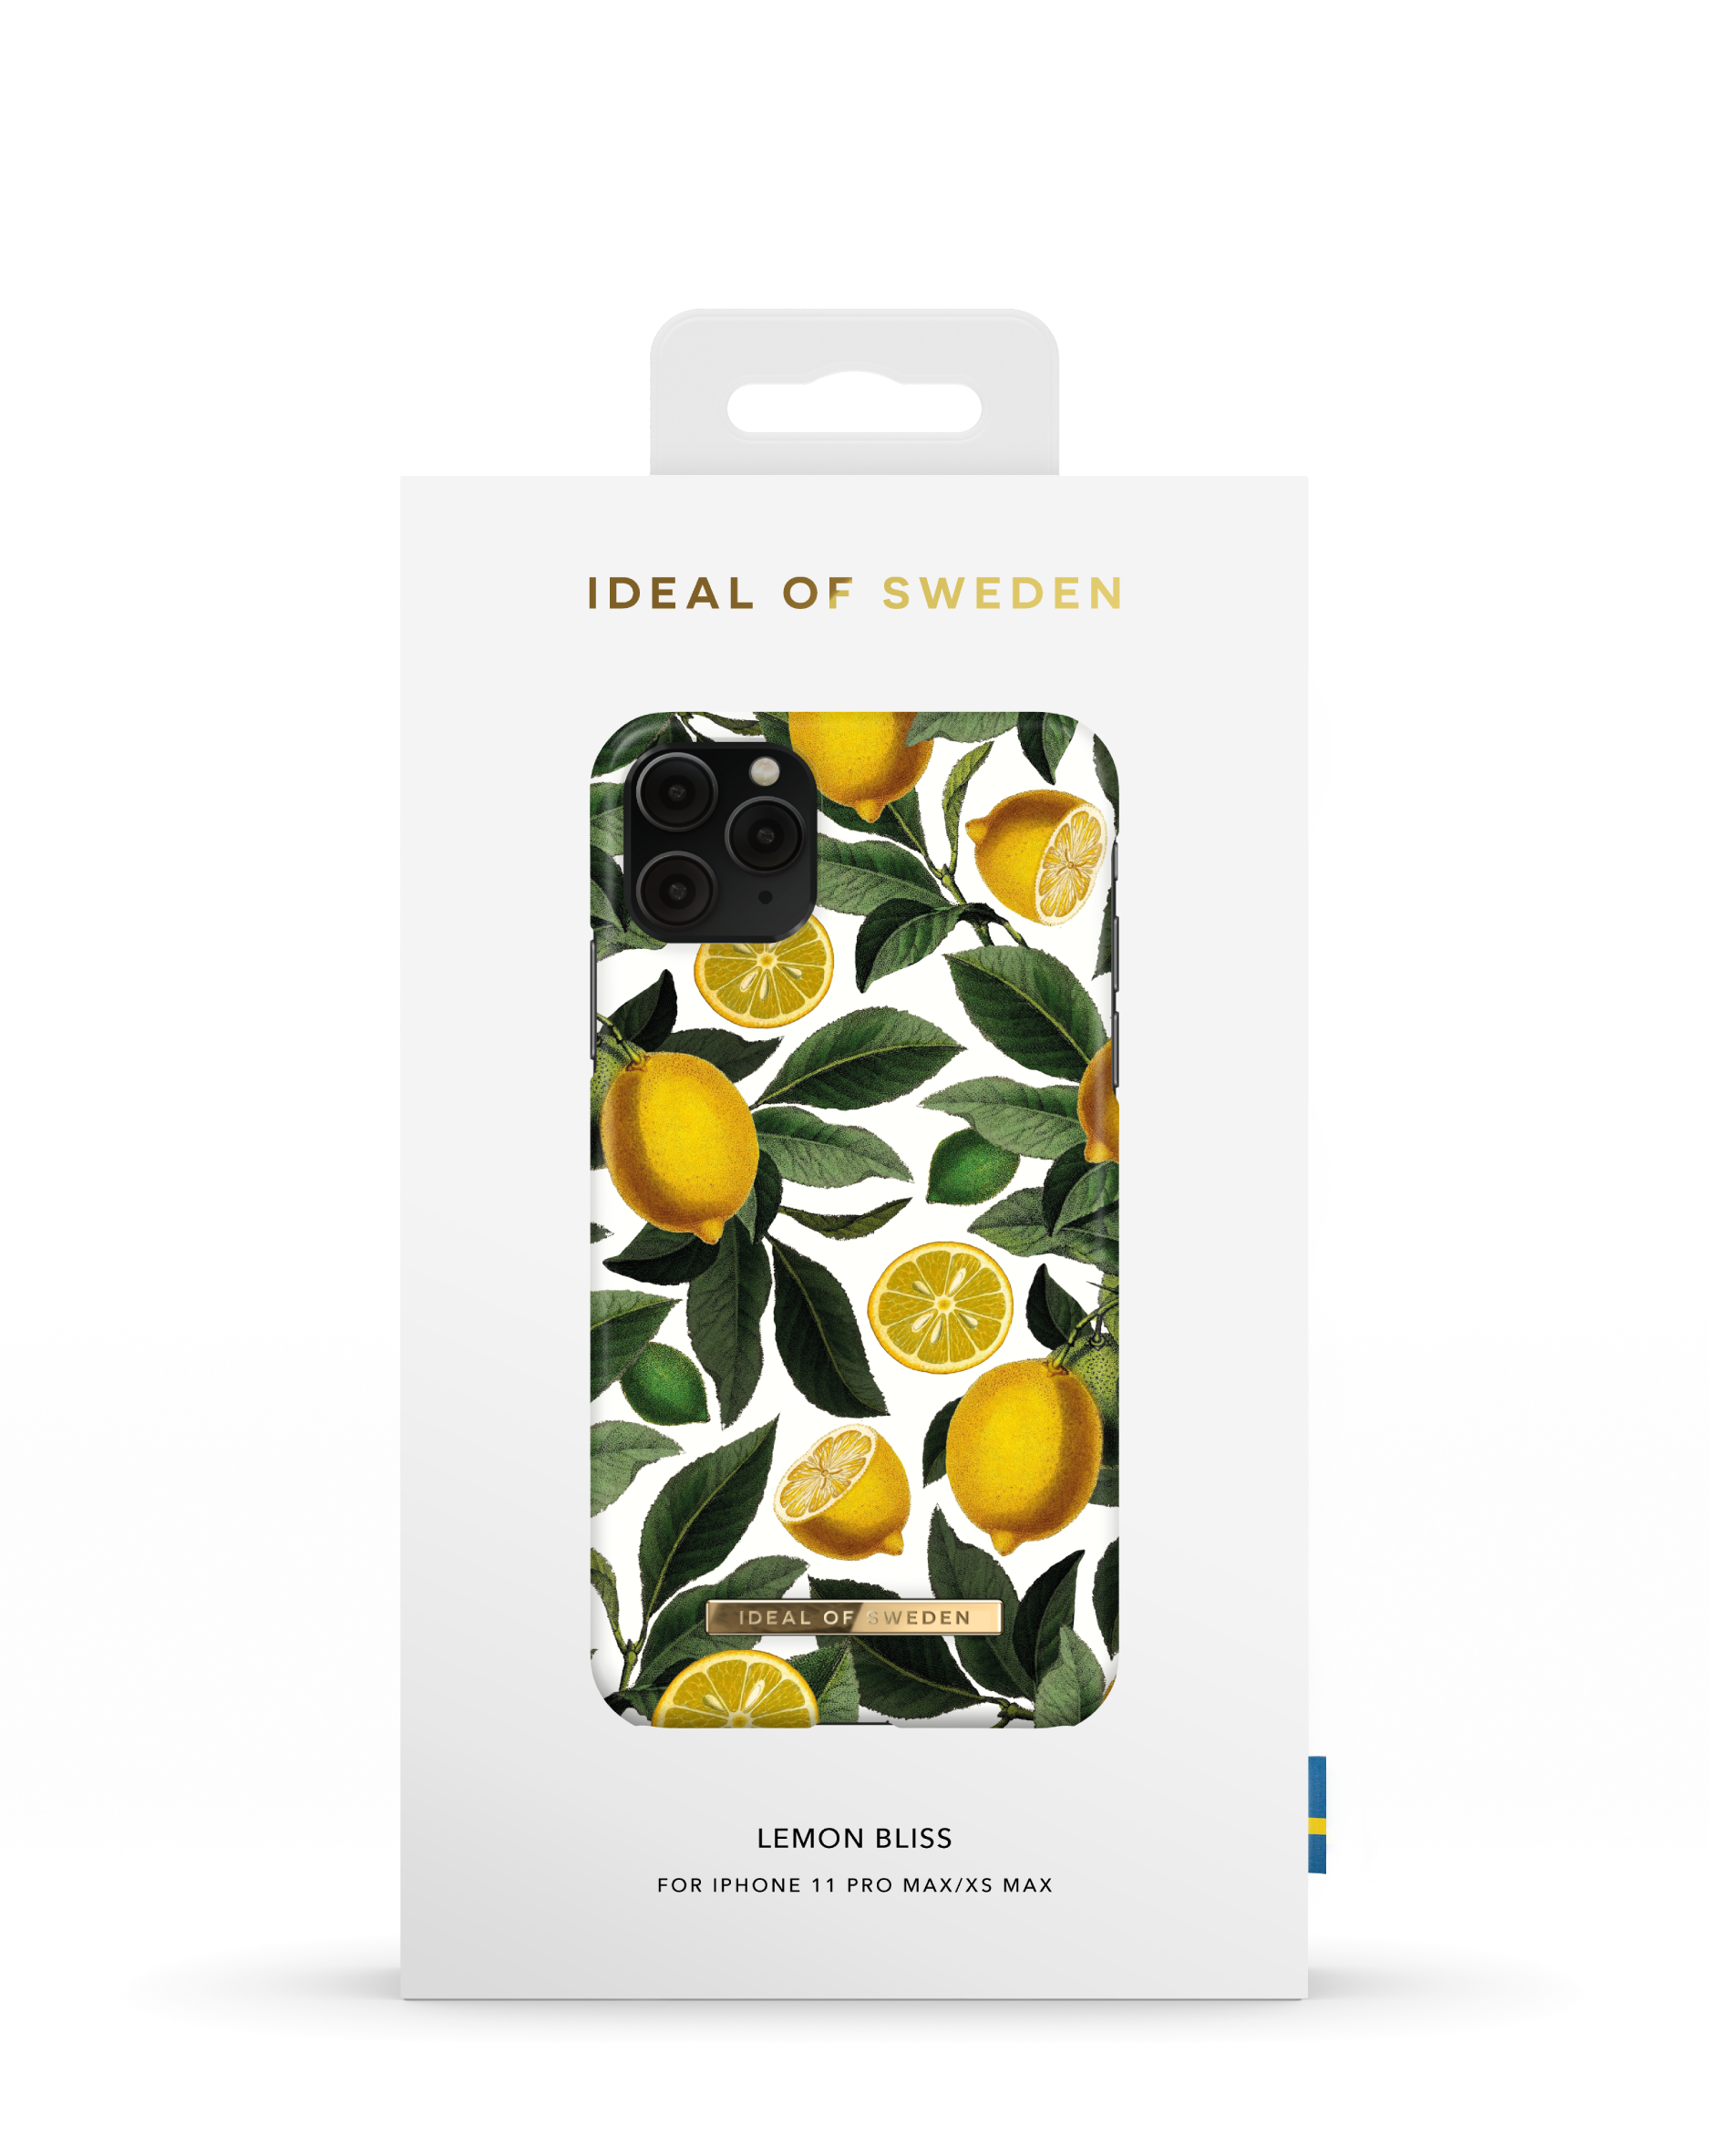 IDEAL OF SWEDEN IDFCSS20-I1965-196, Max, Lemon Apple, Apple iPhone Backcover, Max, Apple Bliss 11 Pro XS iPhone